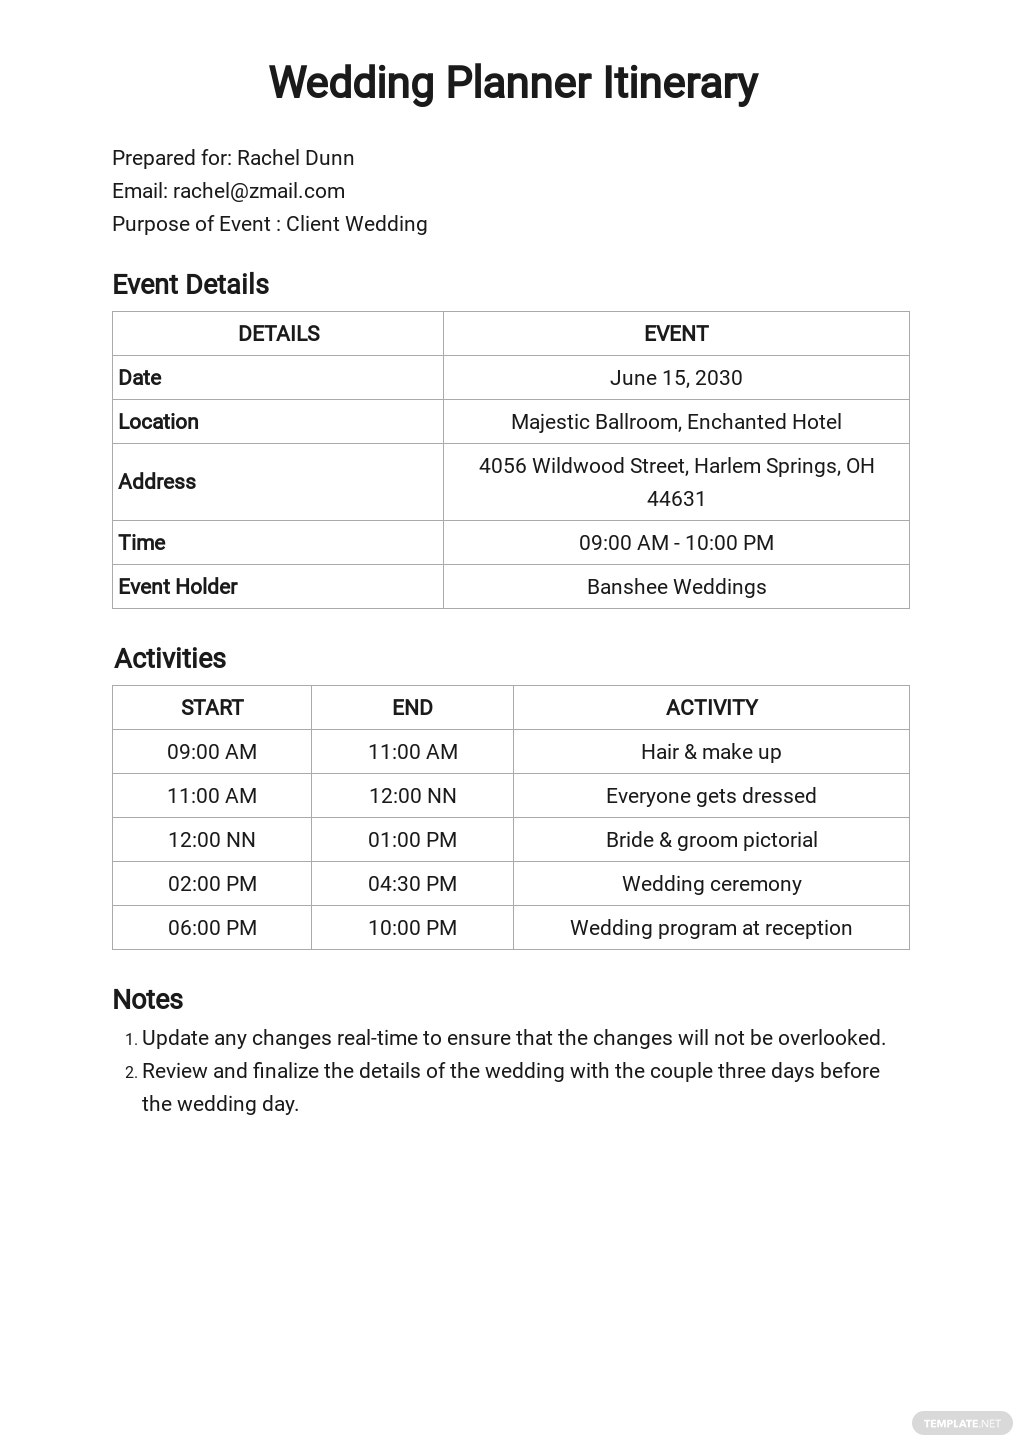 free wedding planner itinerary template1